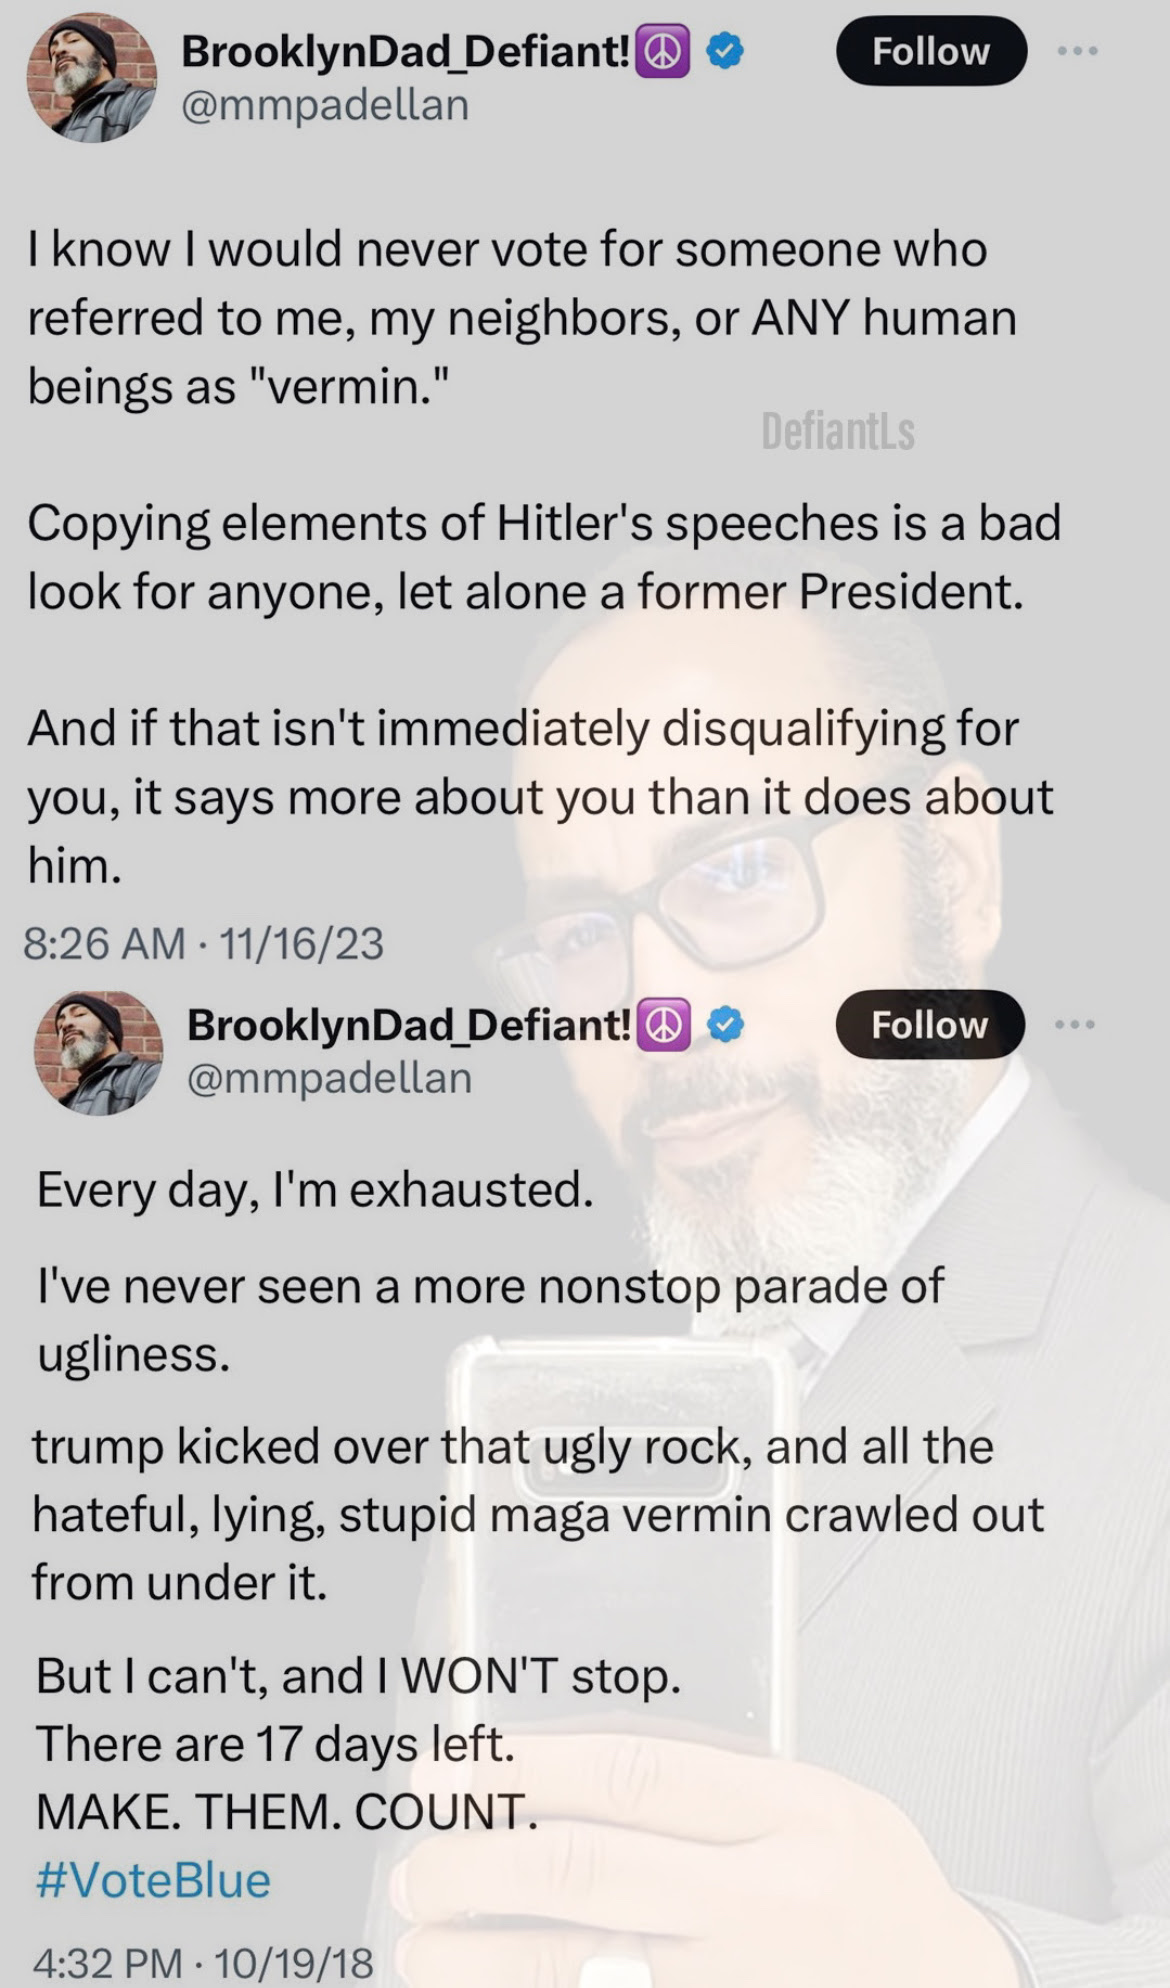 Hypocrite: Brooklyn Dad uses the word vermin in 2018 then later condemnds Trump for use the word.